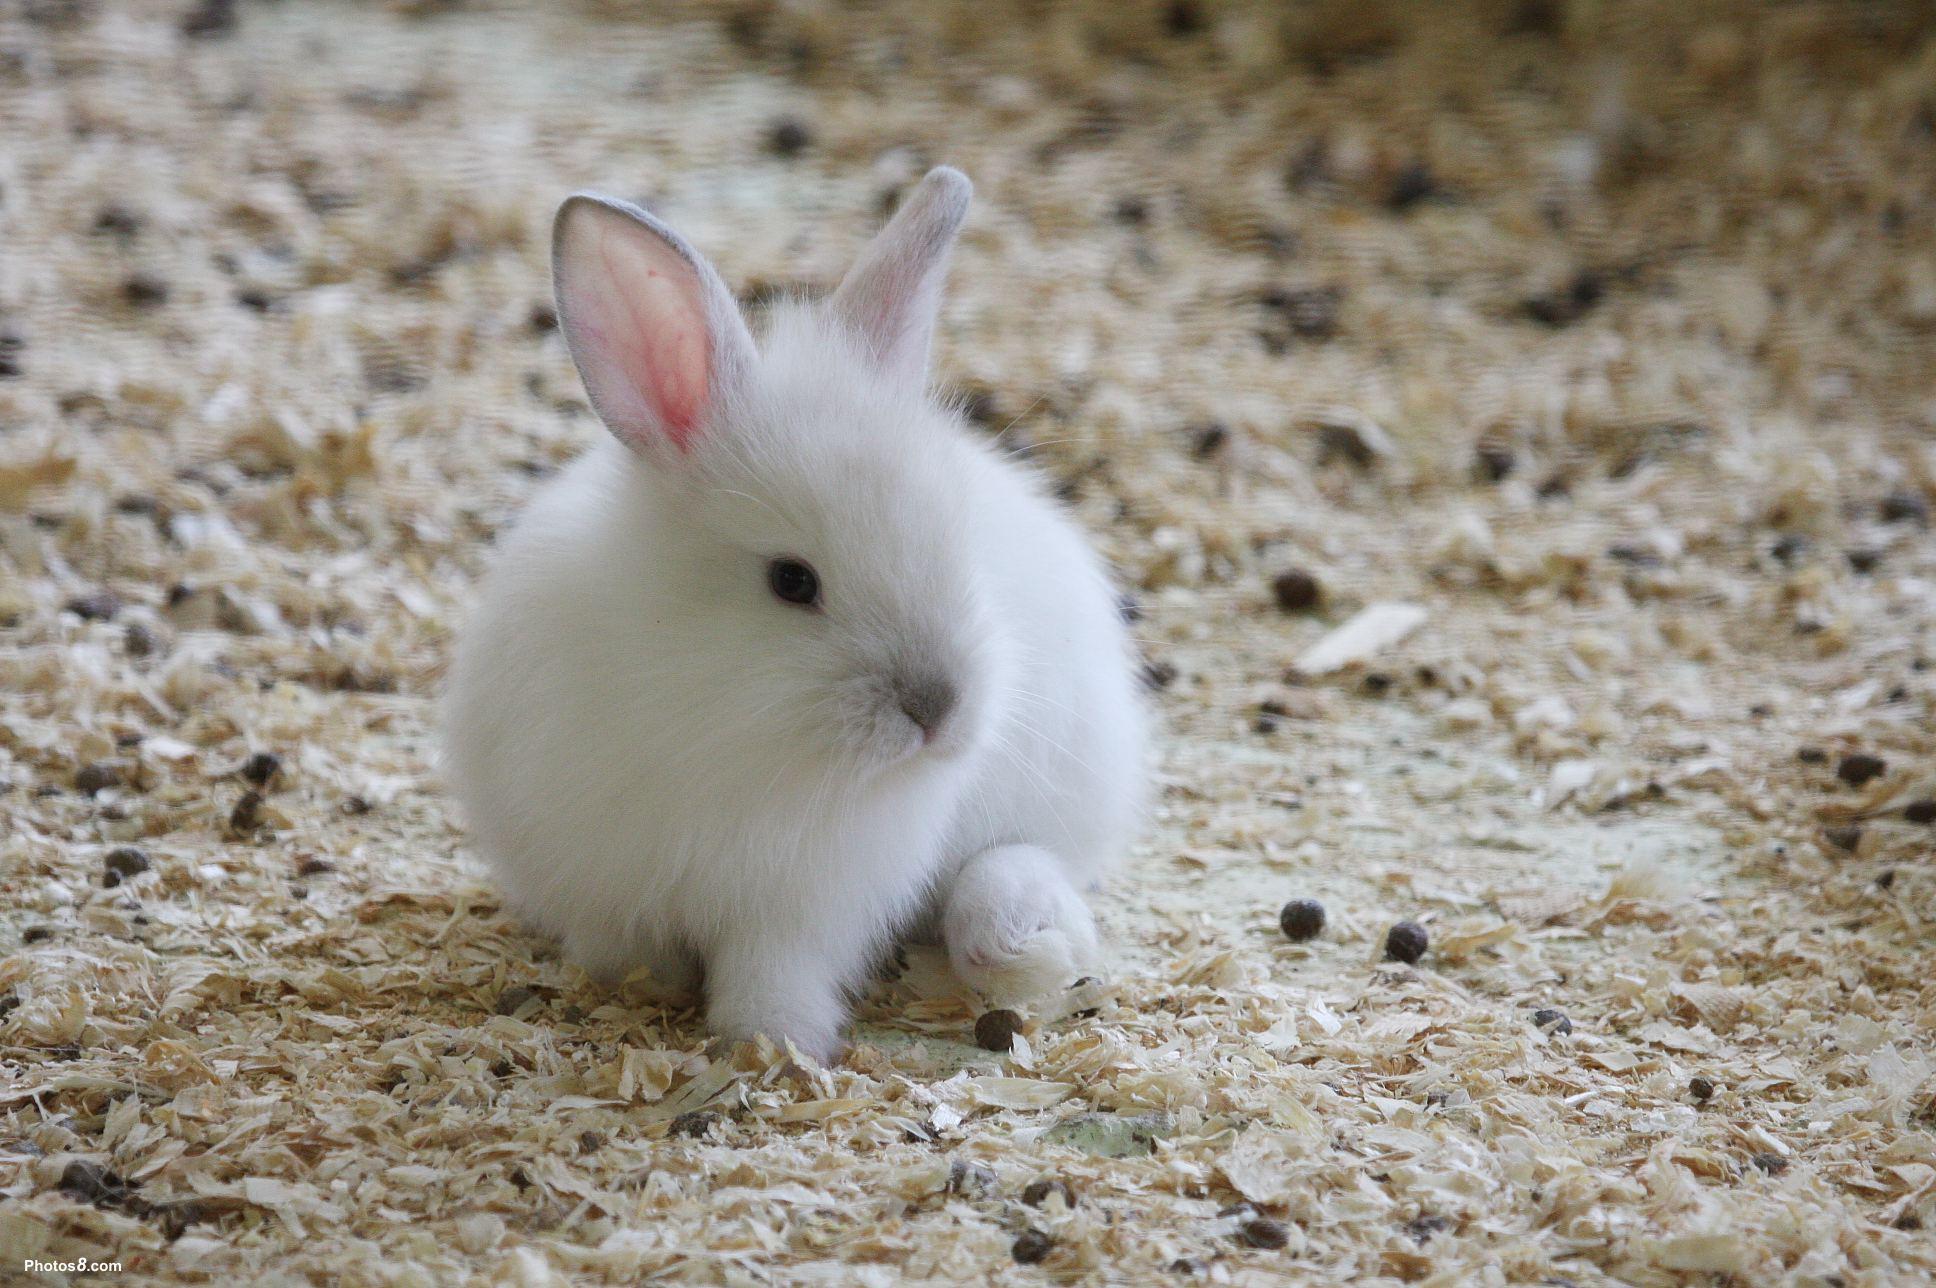 image For > Image Of White Rabbits